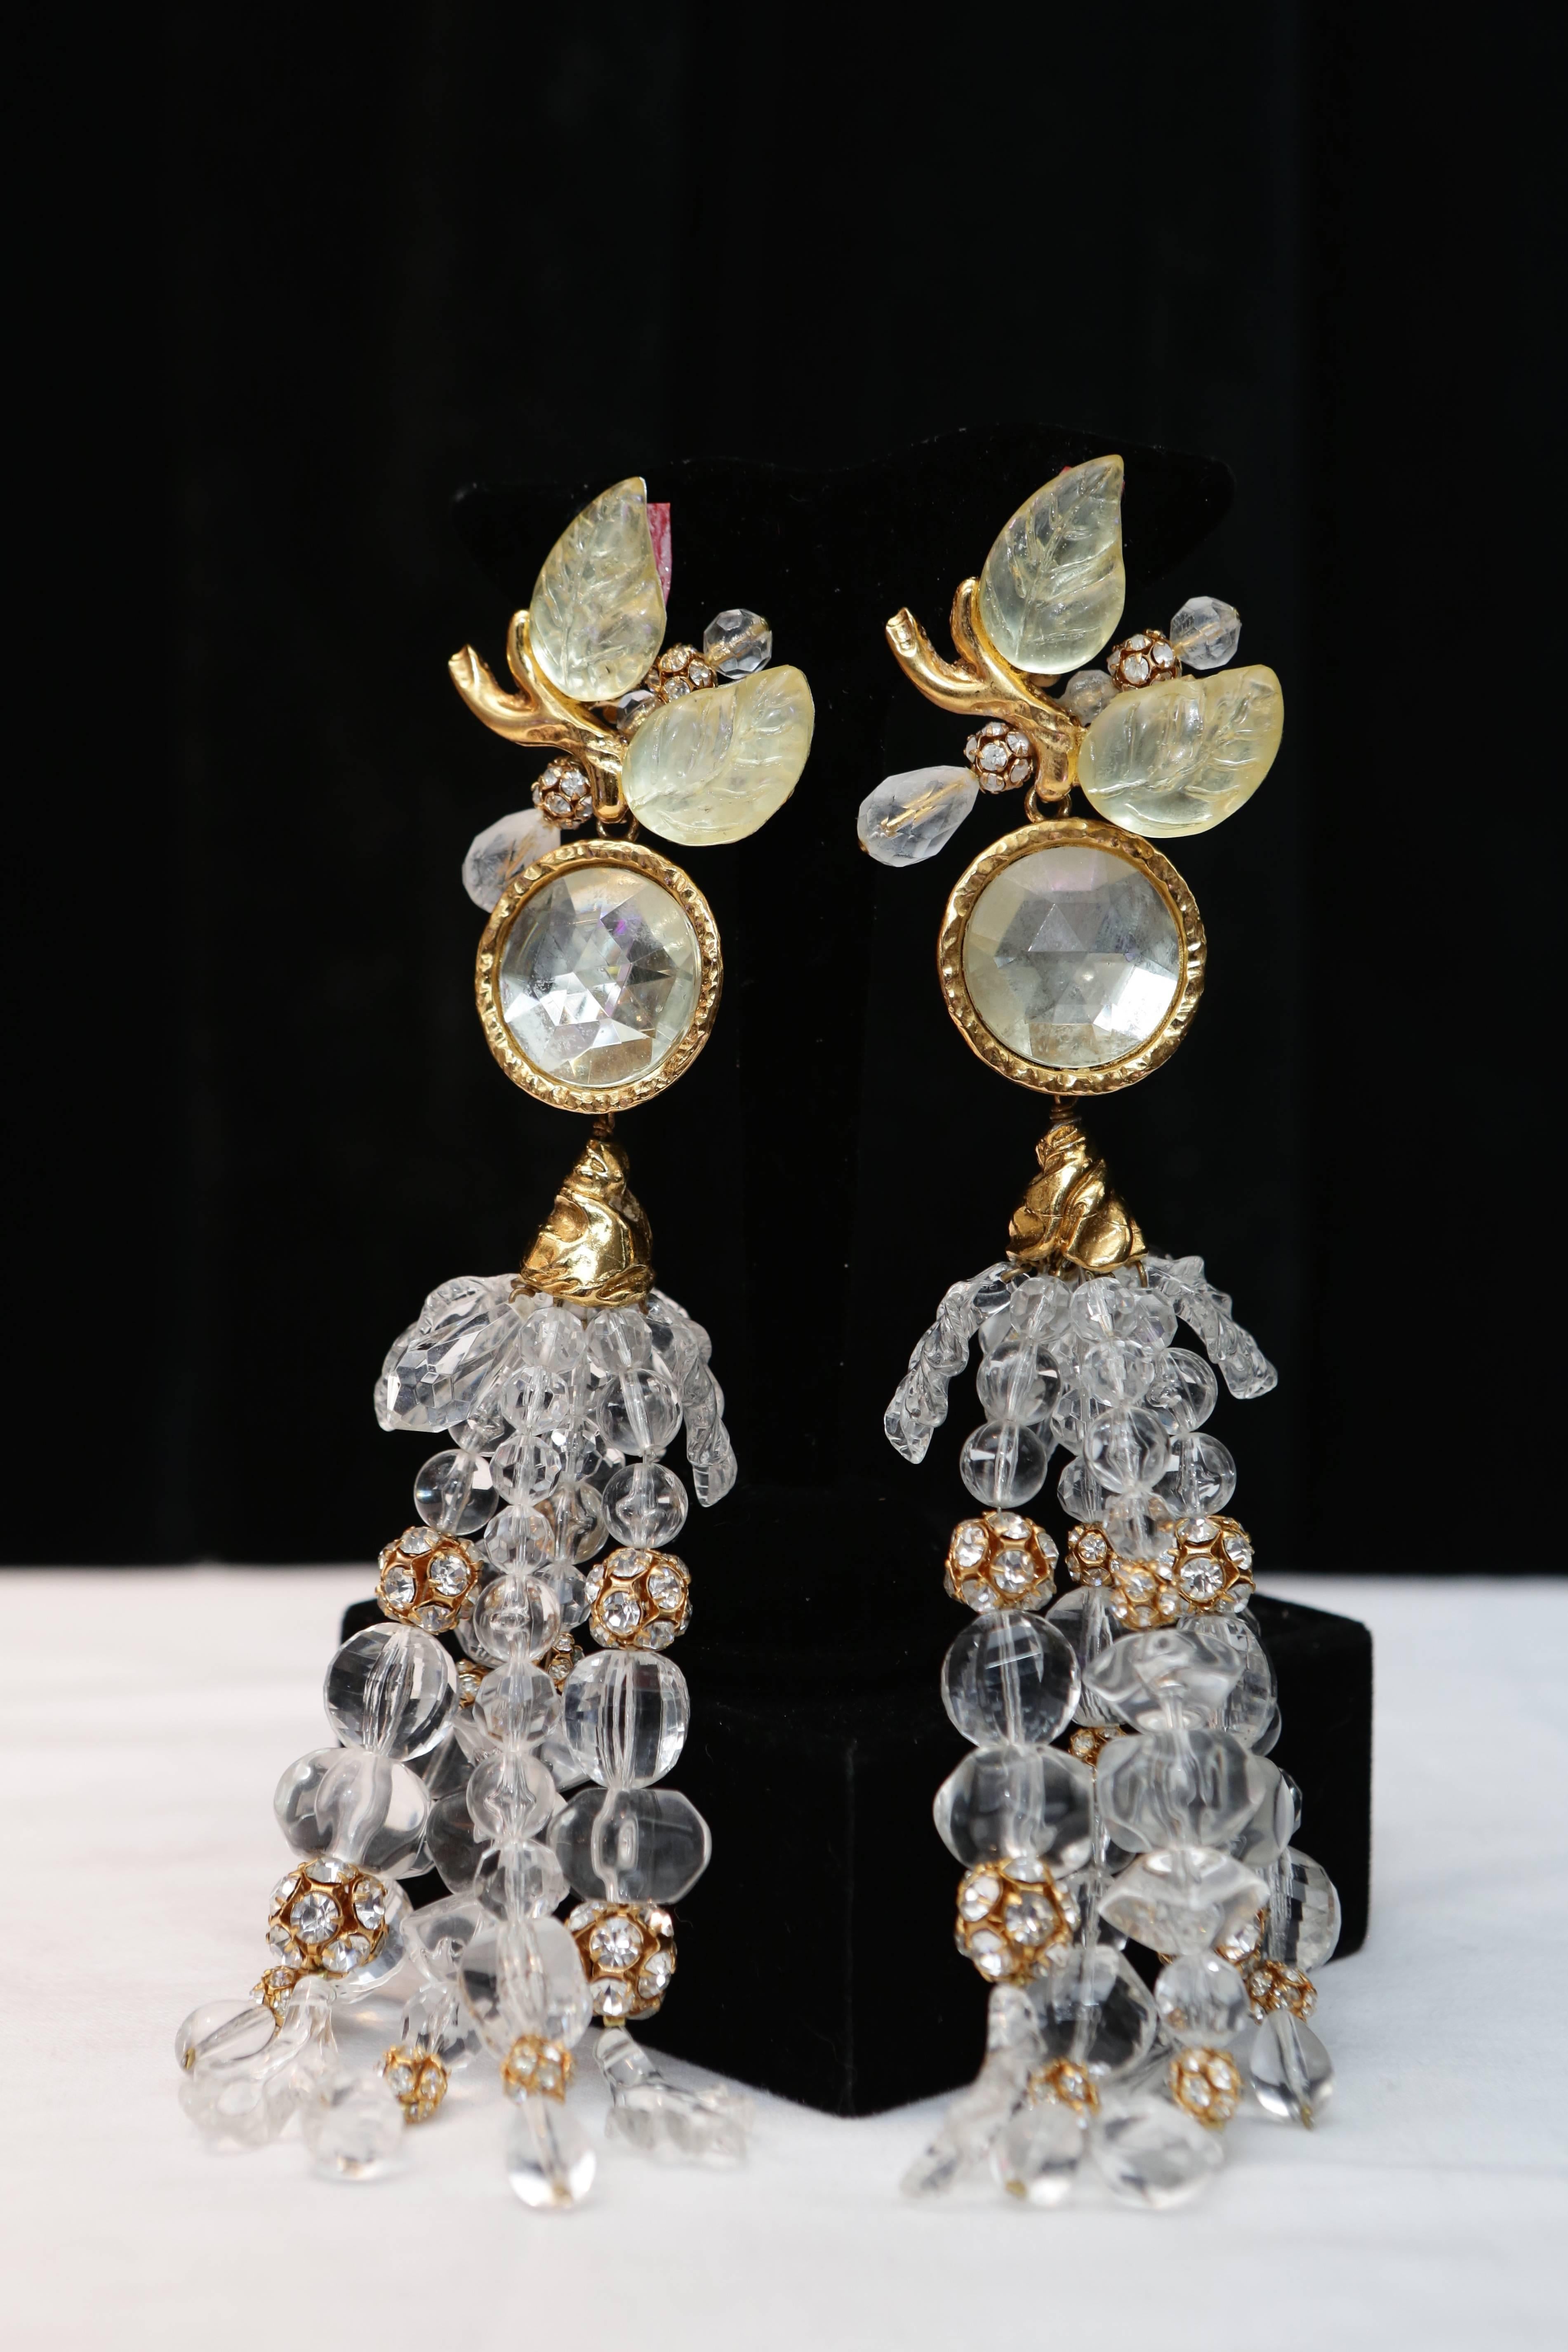 CHRISTIAN LACROIX DEFILE (Made in France) Huge clip-on earrings decorated with a botanical pattern at earlobe, further embellished with a cascade of spheres with rhinestones and transparent faceted glass beads.

Signed at back.

Circa 1980.

Length